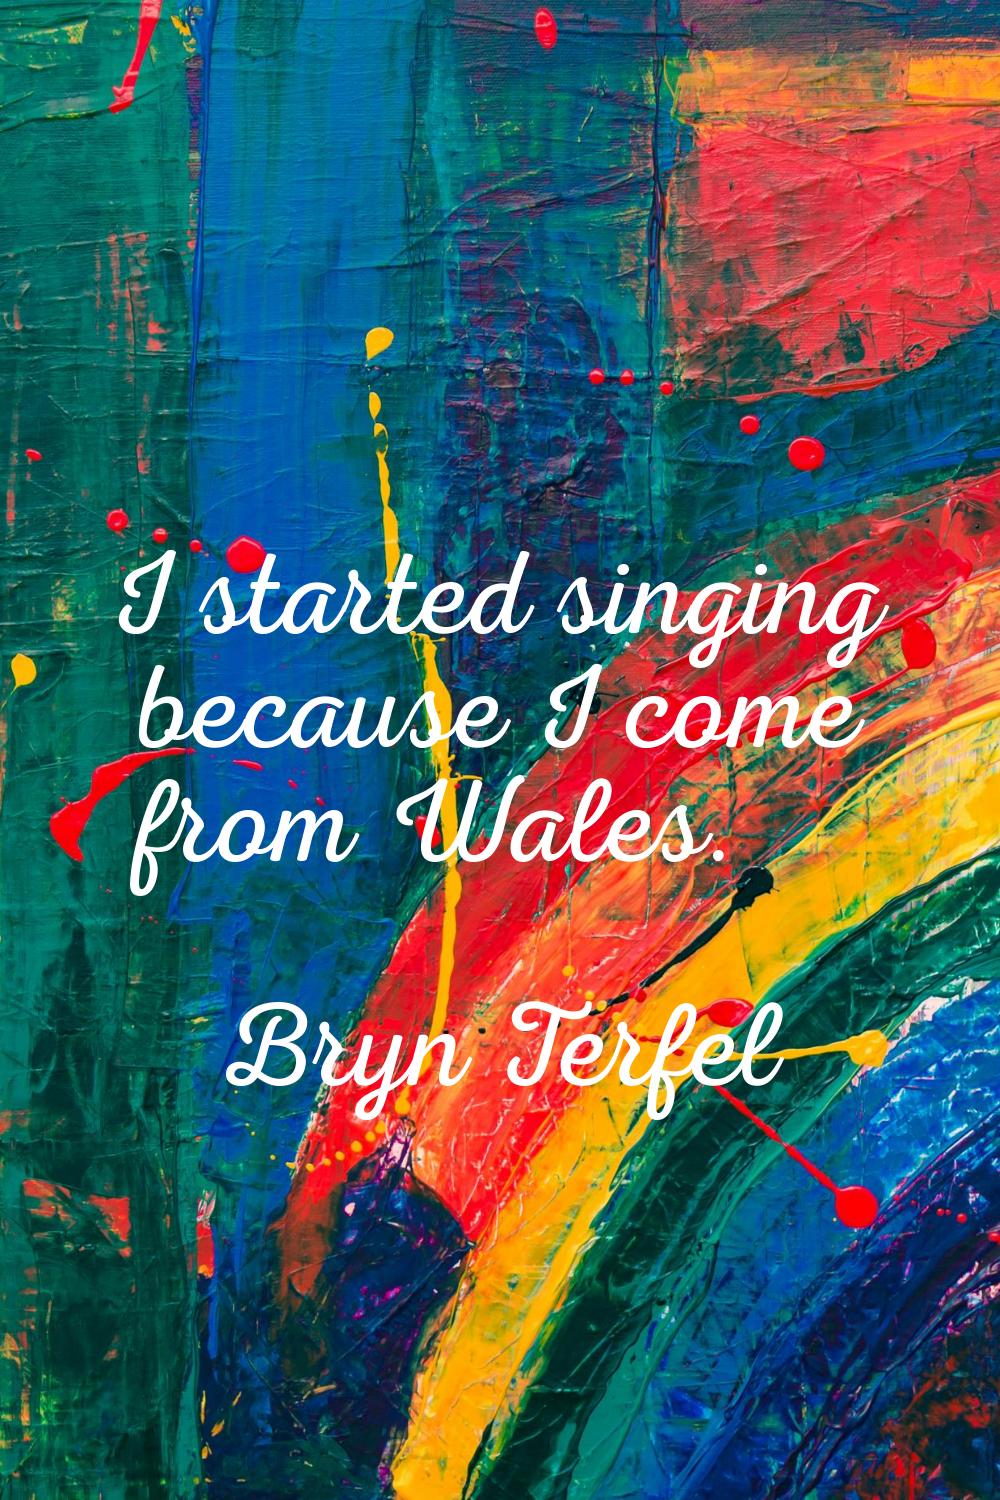 I started singing because I come from Wales.